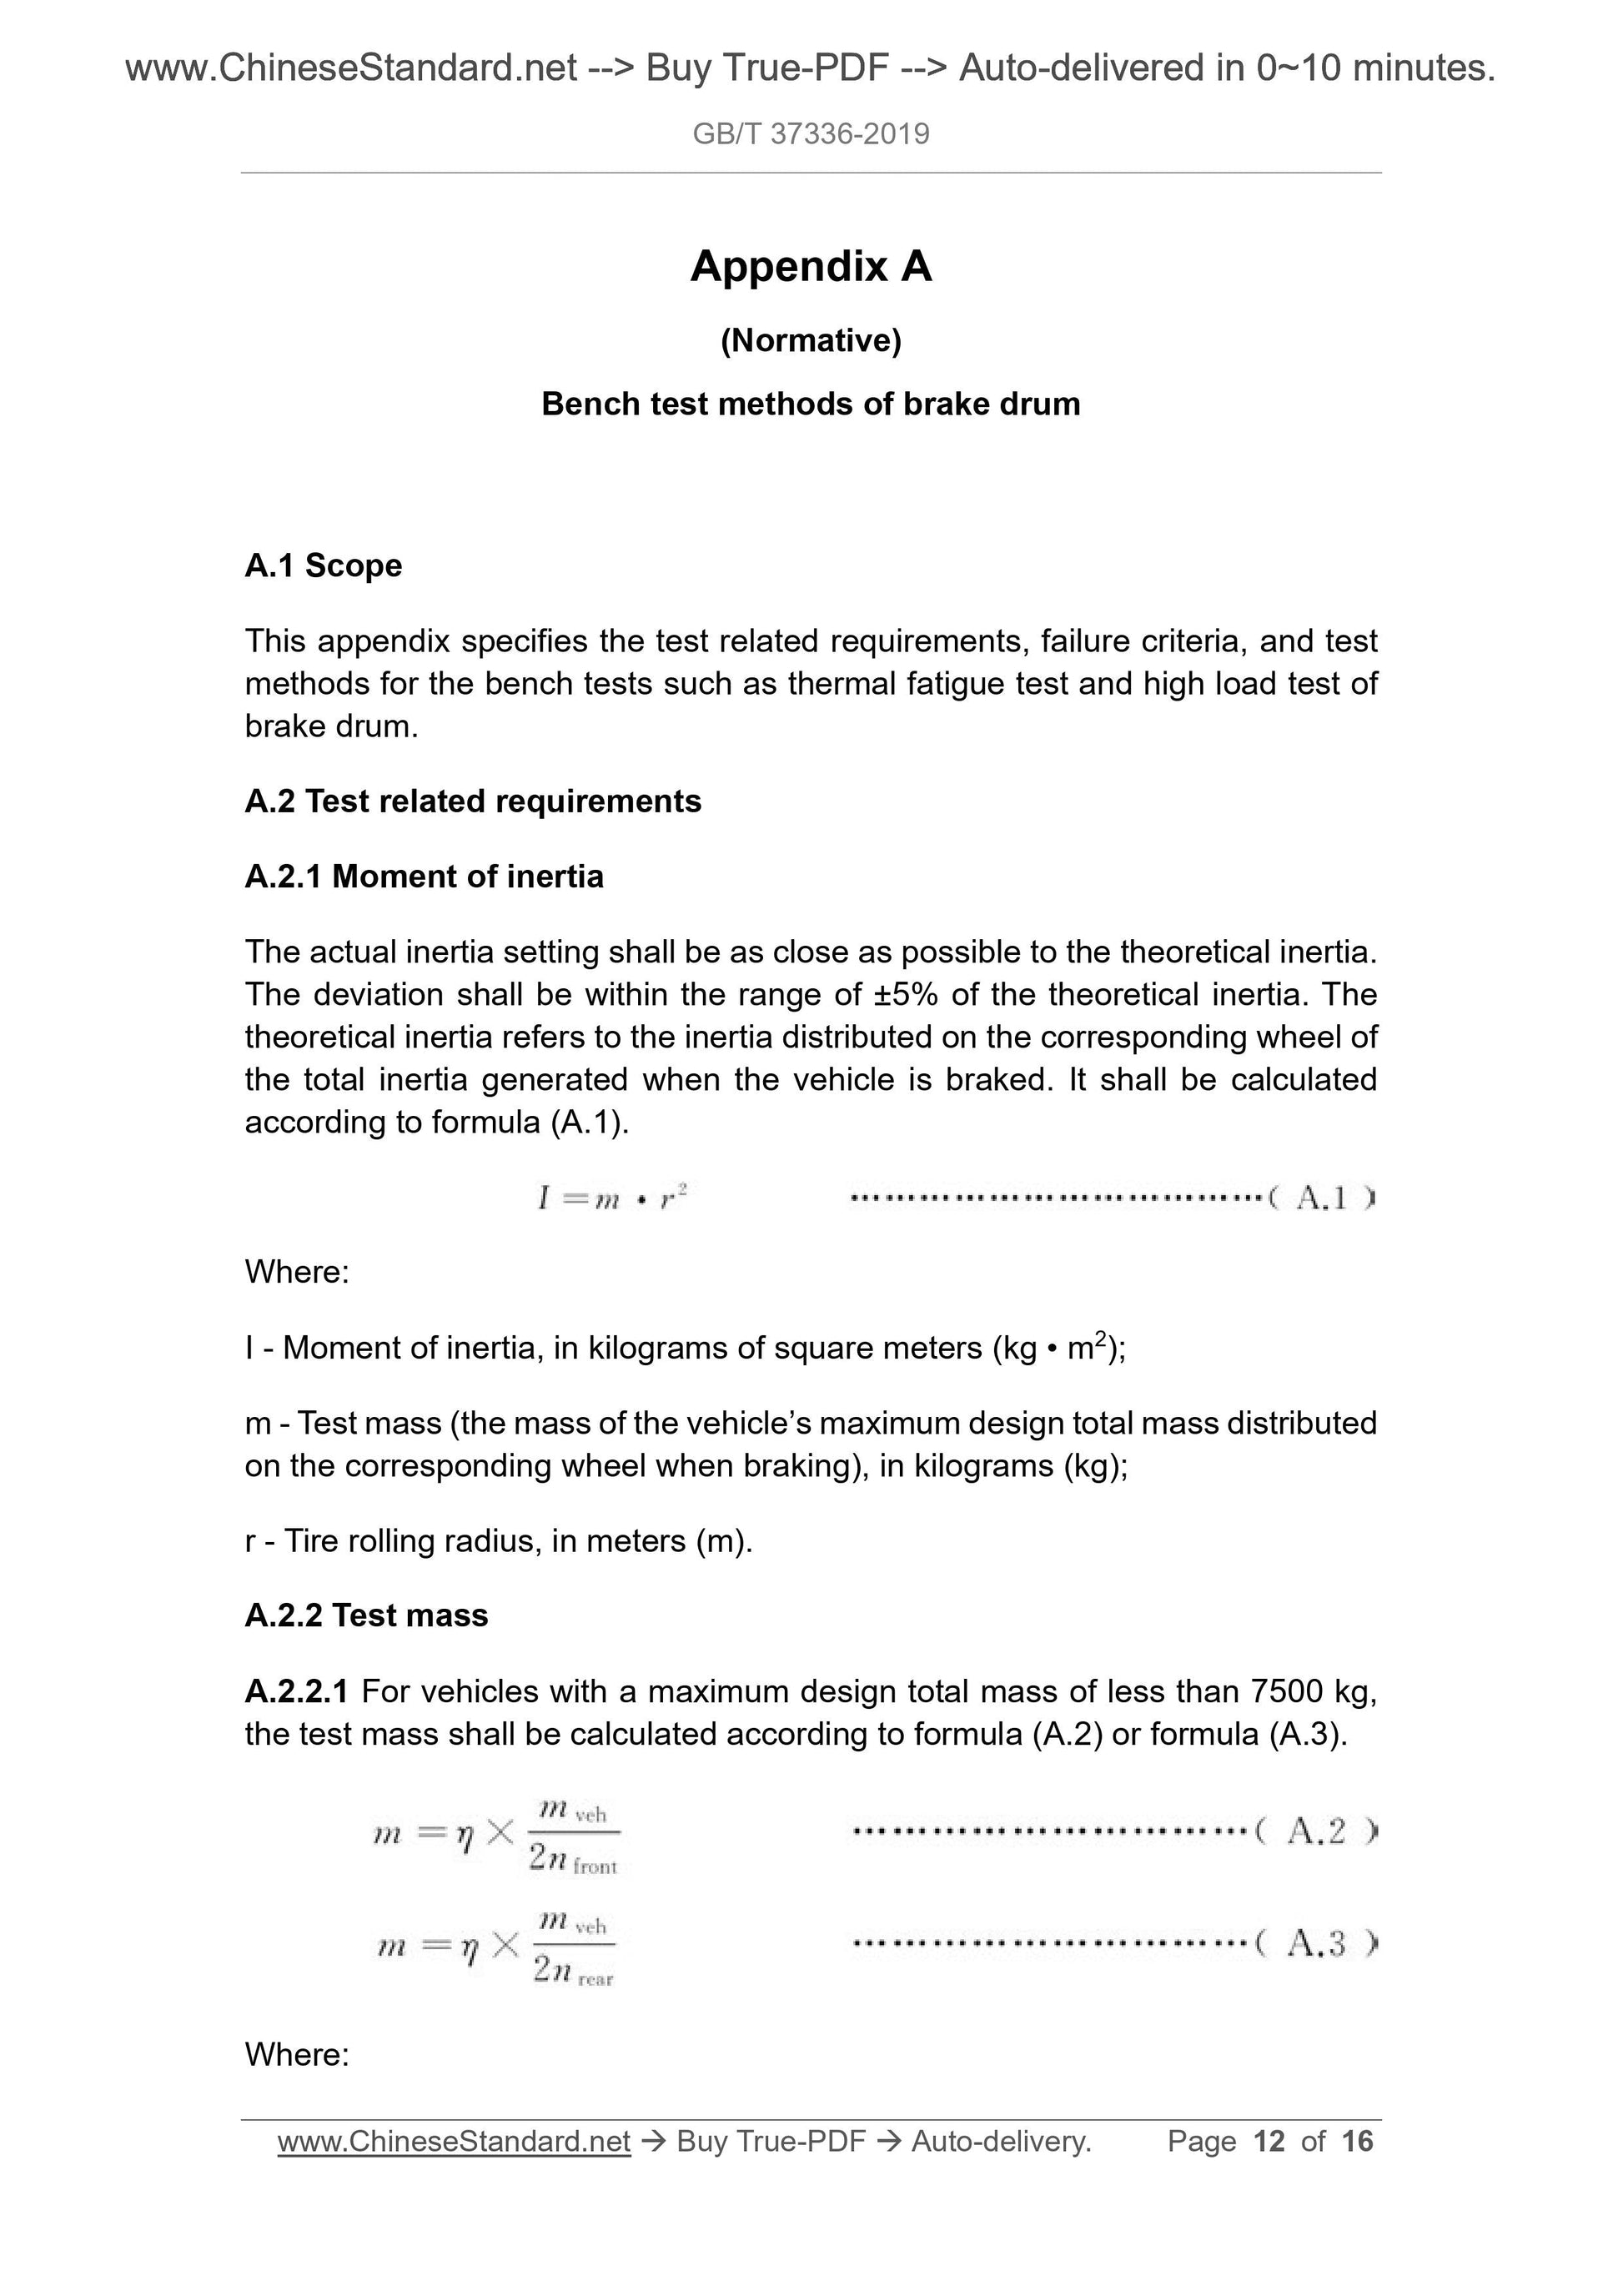 GB/T 37336-2019 Page 6